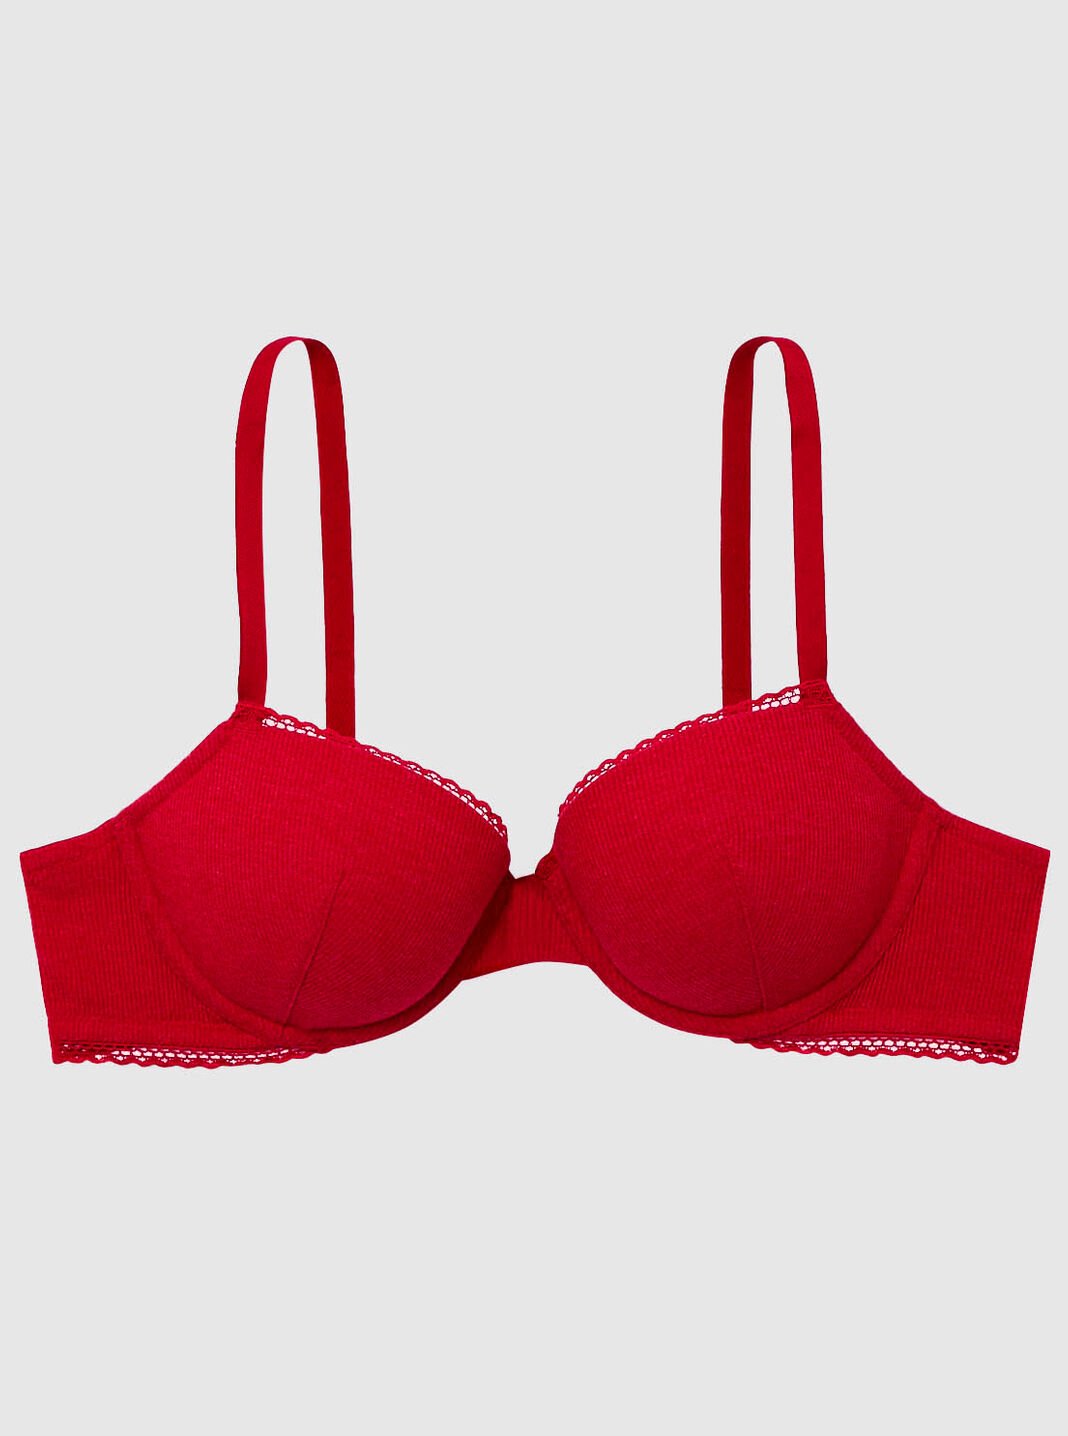 U-B2-3 Germany Blancheporte Cotton Lace Wire-Free Full Support Bras